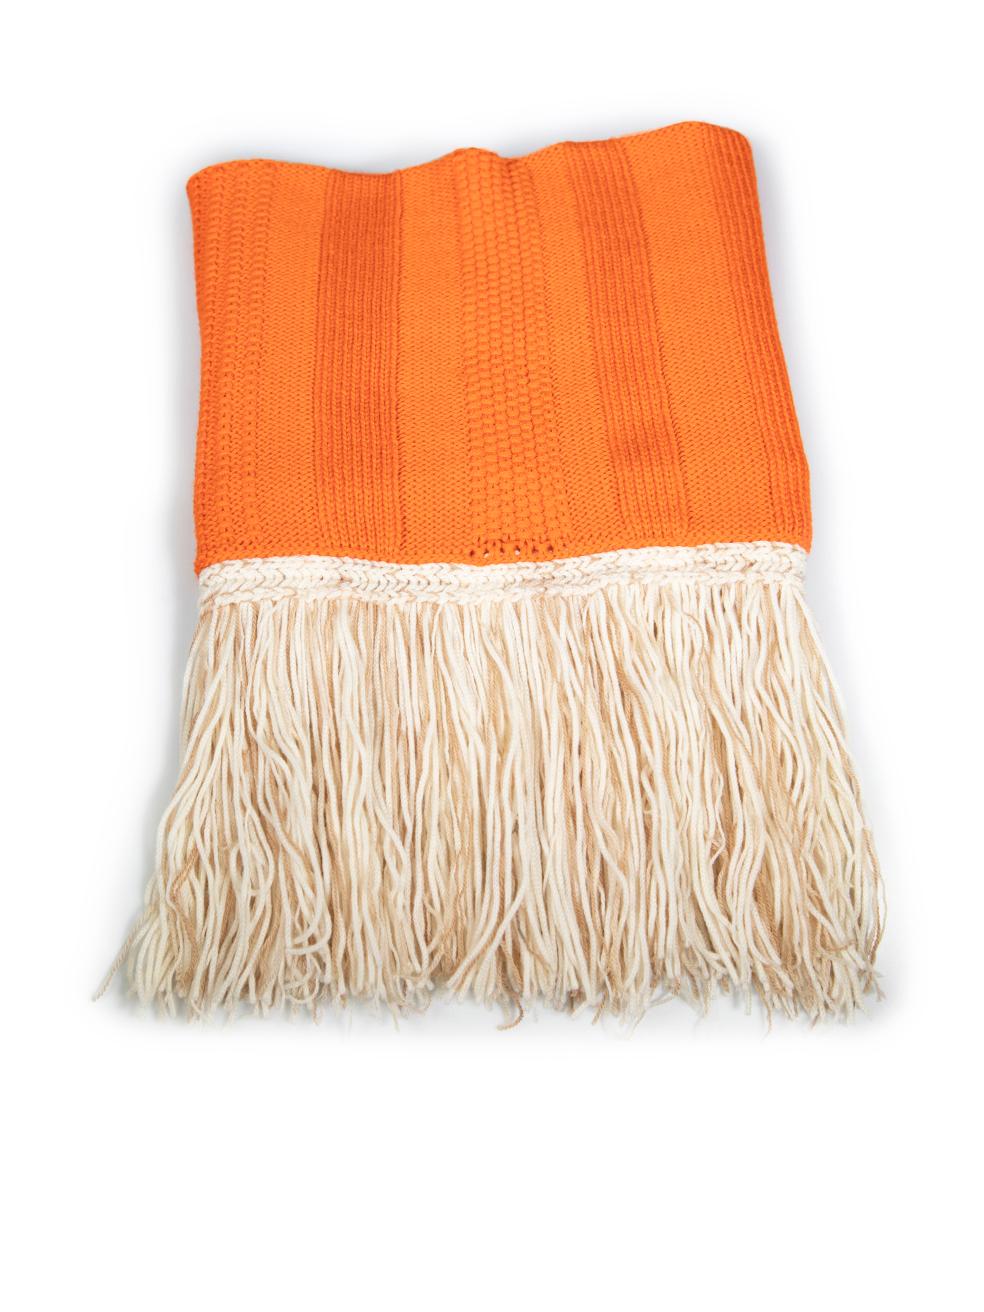 CONDITION is Never worn, with tags. No visible wear to snood is evident on this new Missoni designer resale item.
 
 
 
 Details
 
 
 Beige, orange accents
 
 Inside the snood is orange
 
 Label attached to Orange inside
 
 Wool
 
 Striped
 
 Knit
